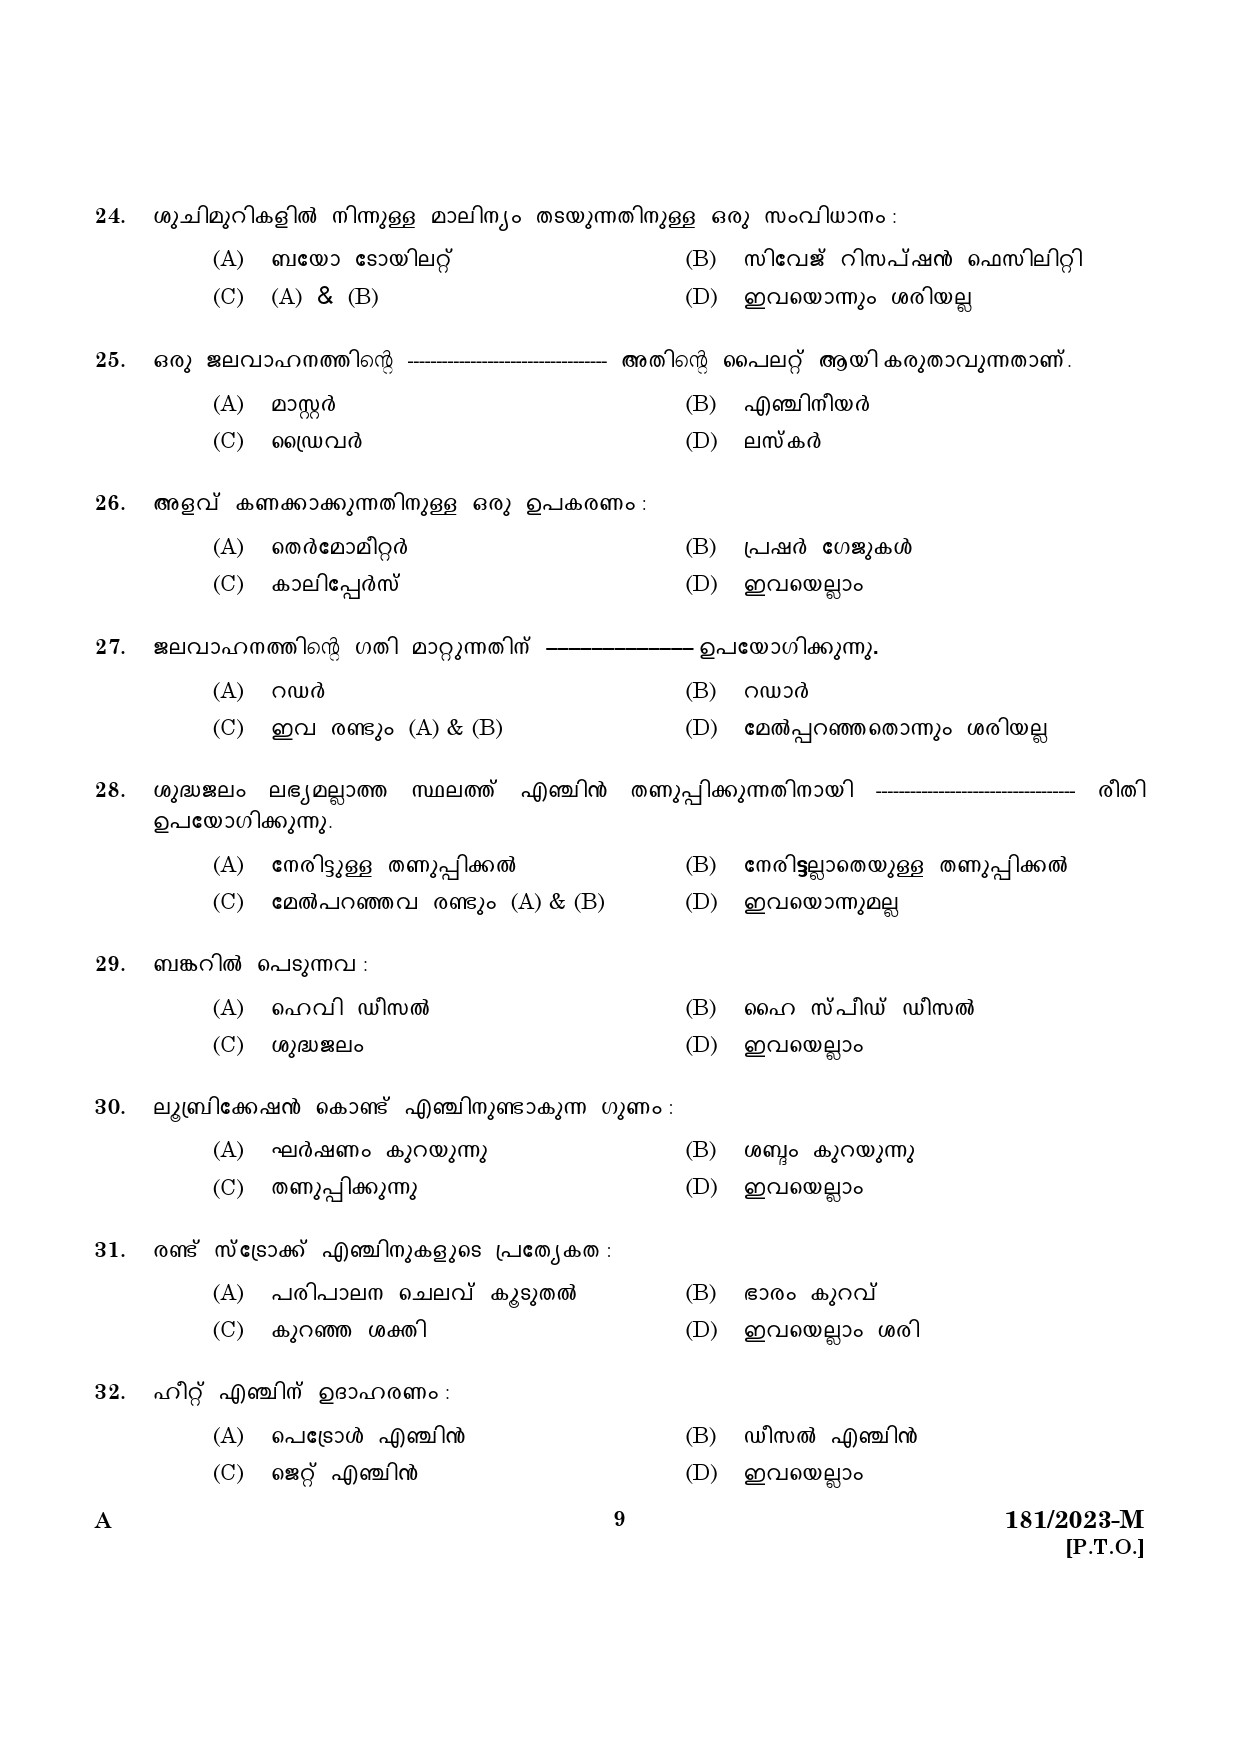 KPSC Forest Boat Driver Malayalam Exam 2023 Code 1812023 M 7